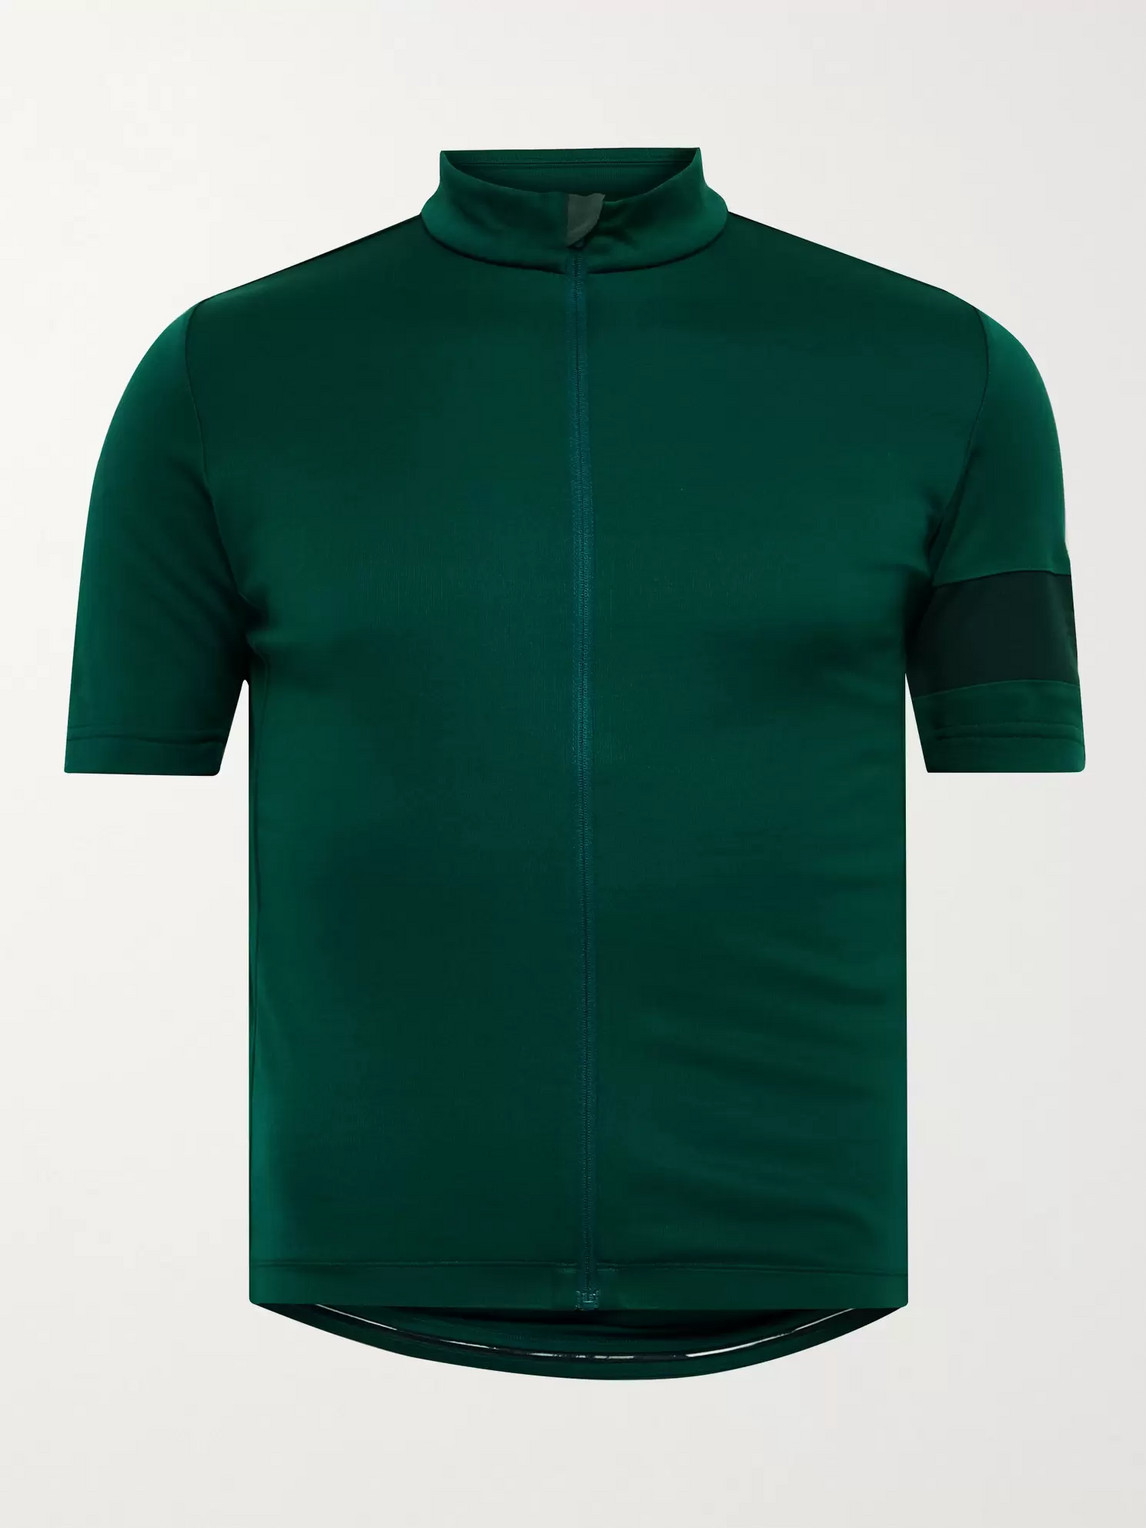 Rapha Classic Cycling Jersey In Green